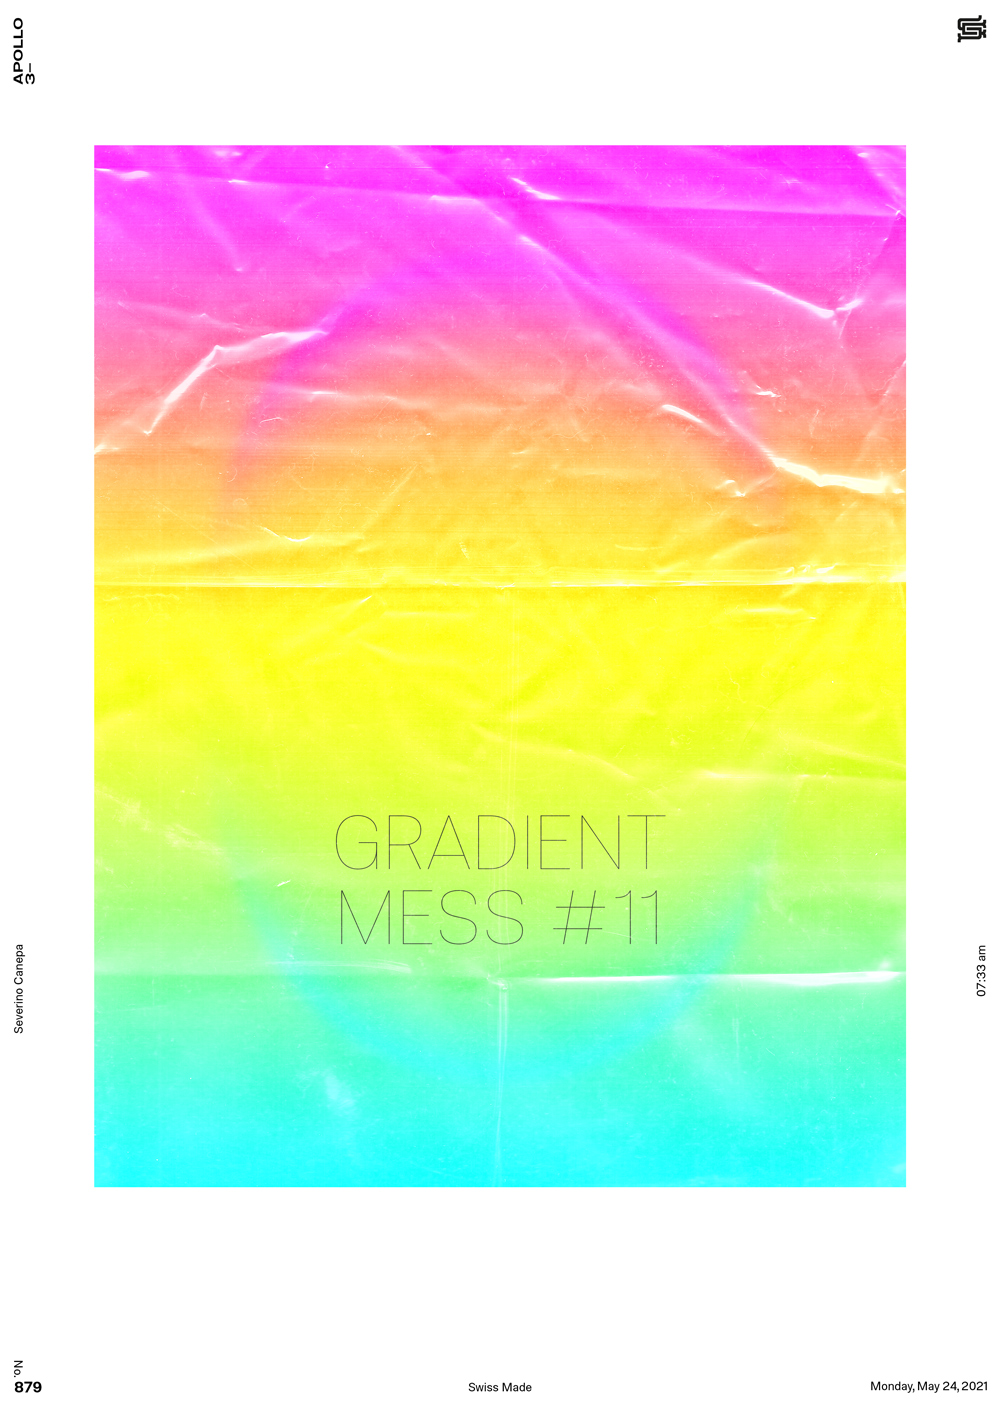 Miniamlist poster creation where I set a plastic wrap above a large rectange filled with a colorful gradient